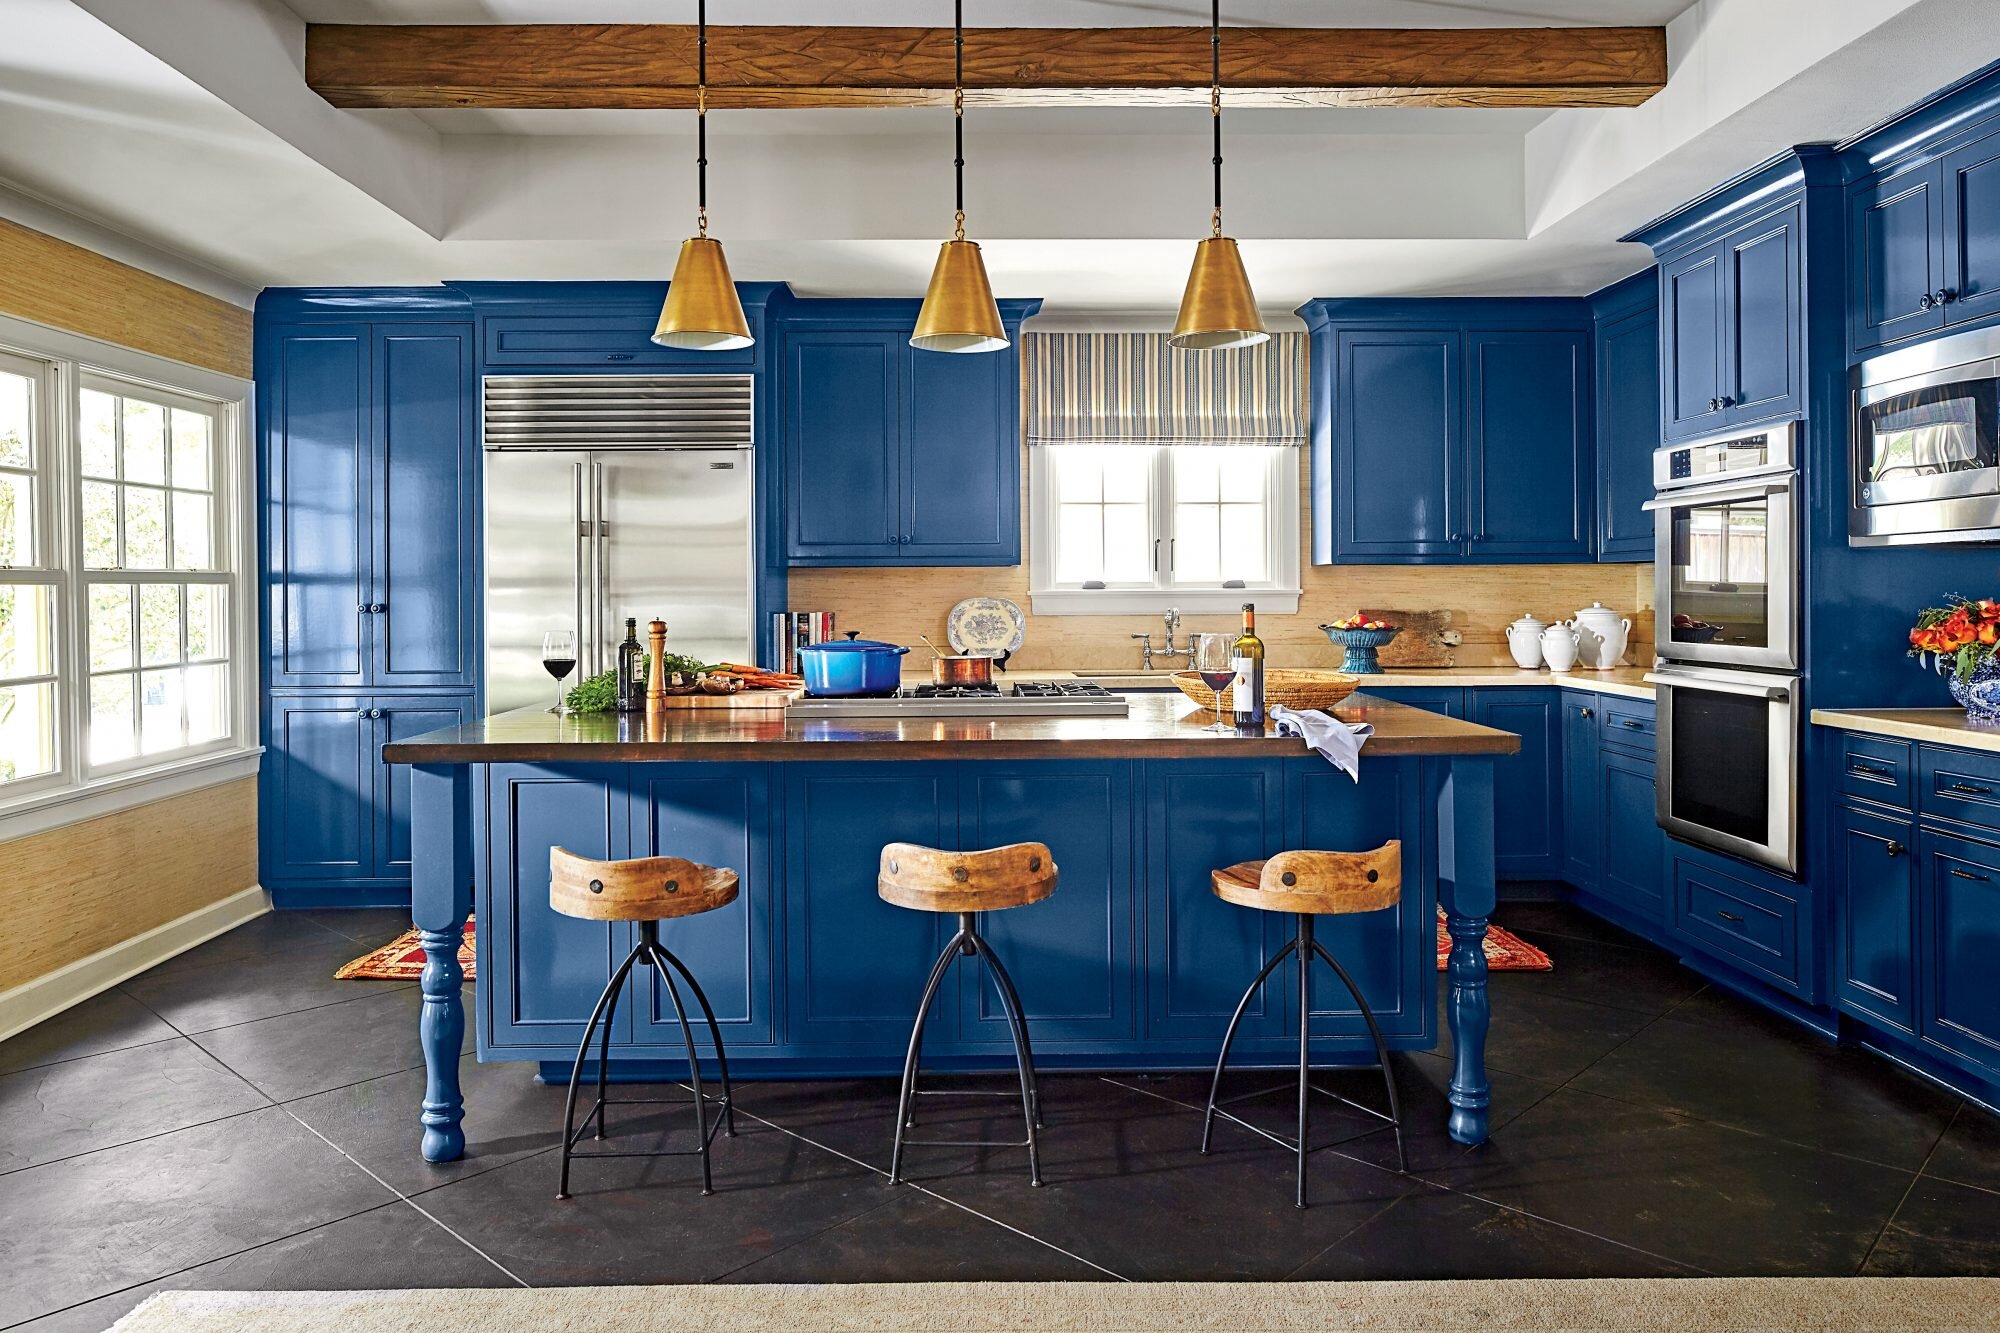 What Is the Difference between Refinishing, Refacing and Resurfacing Kitchen Cabinets?